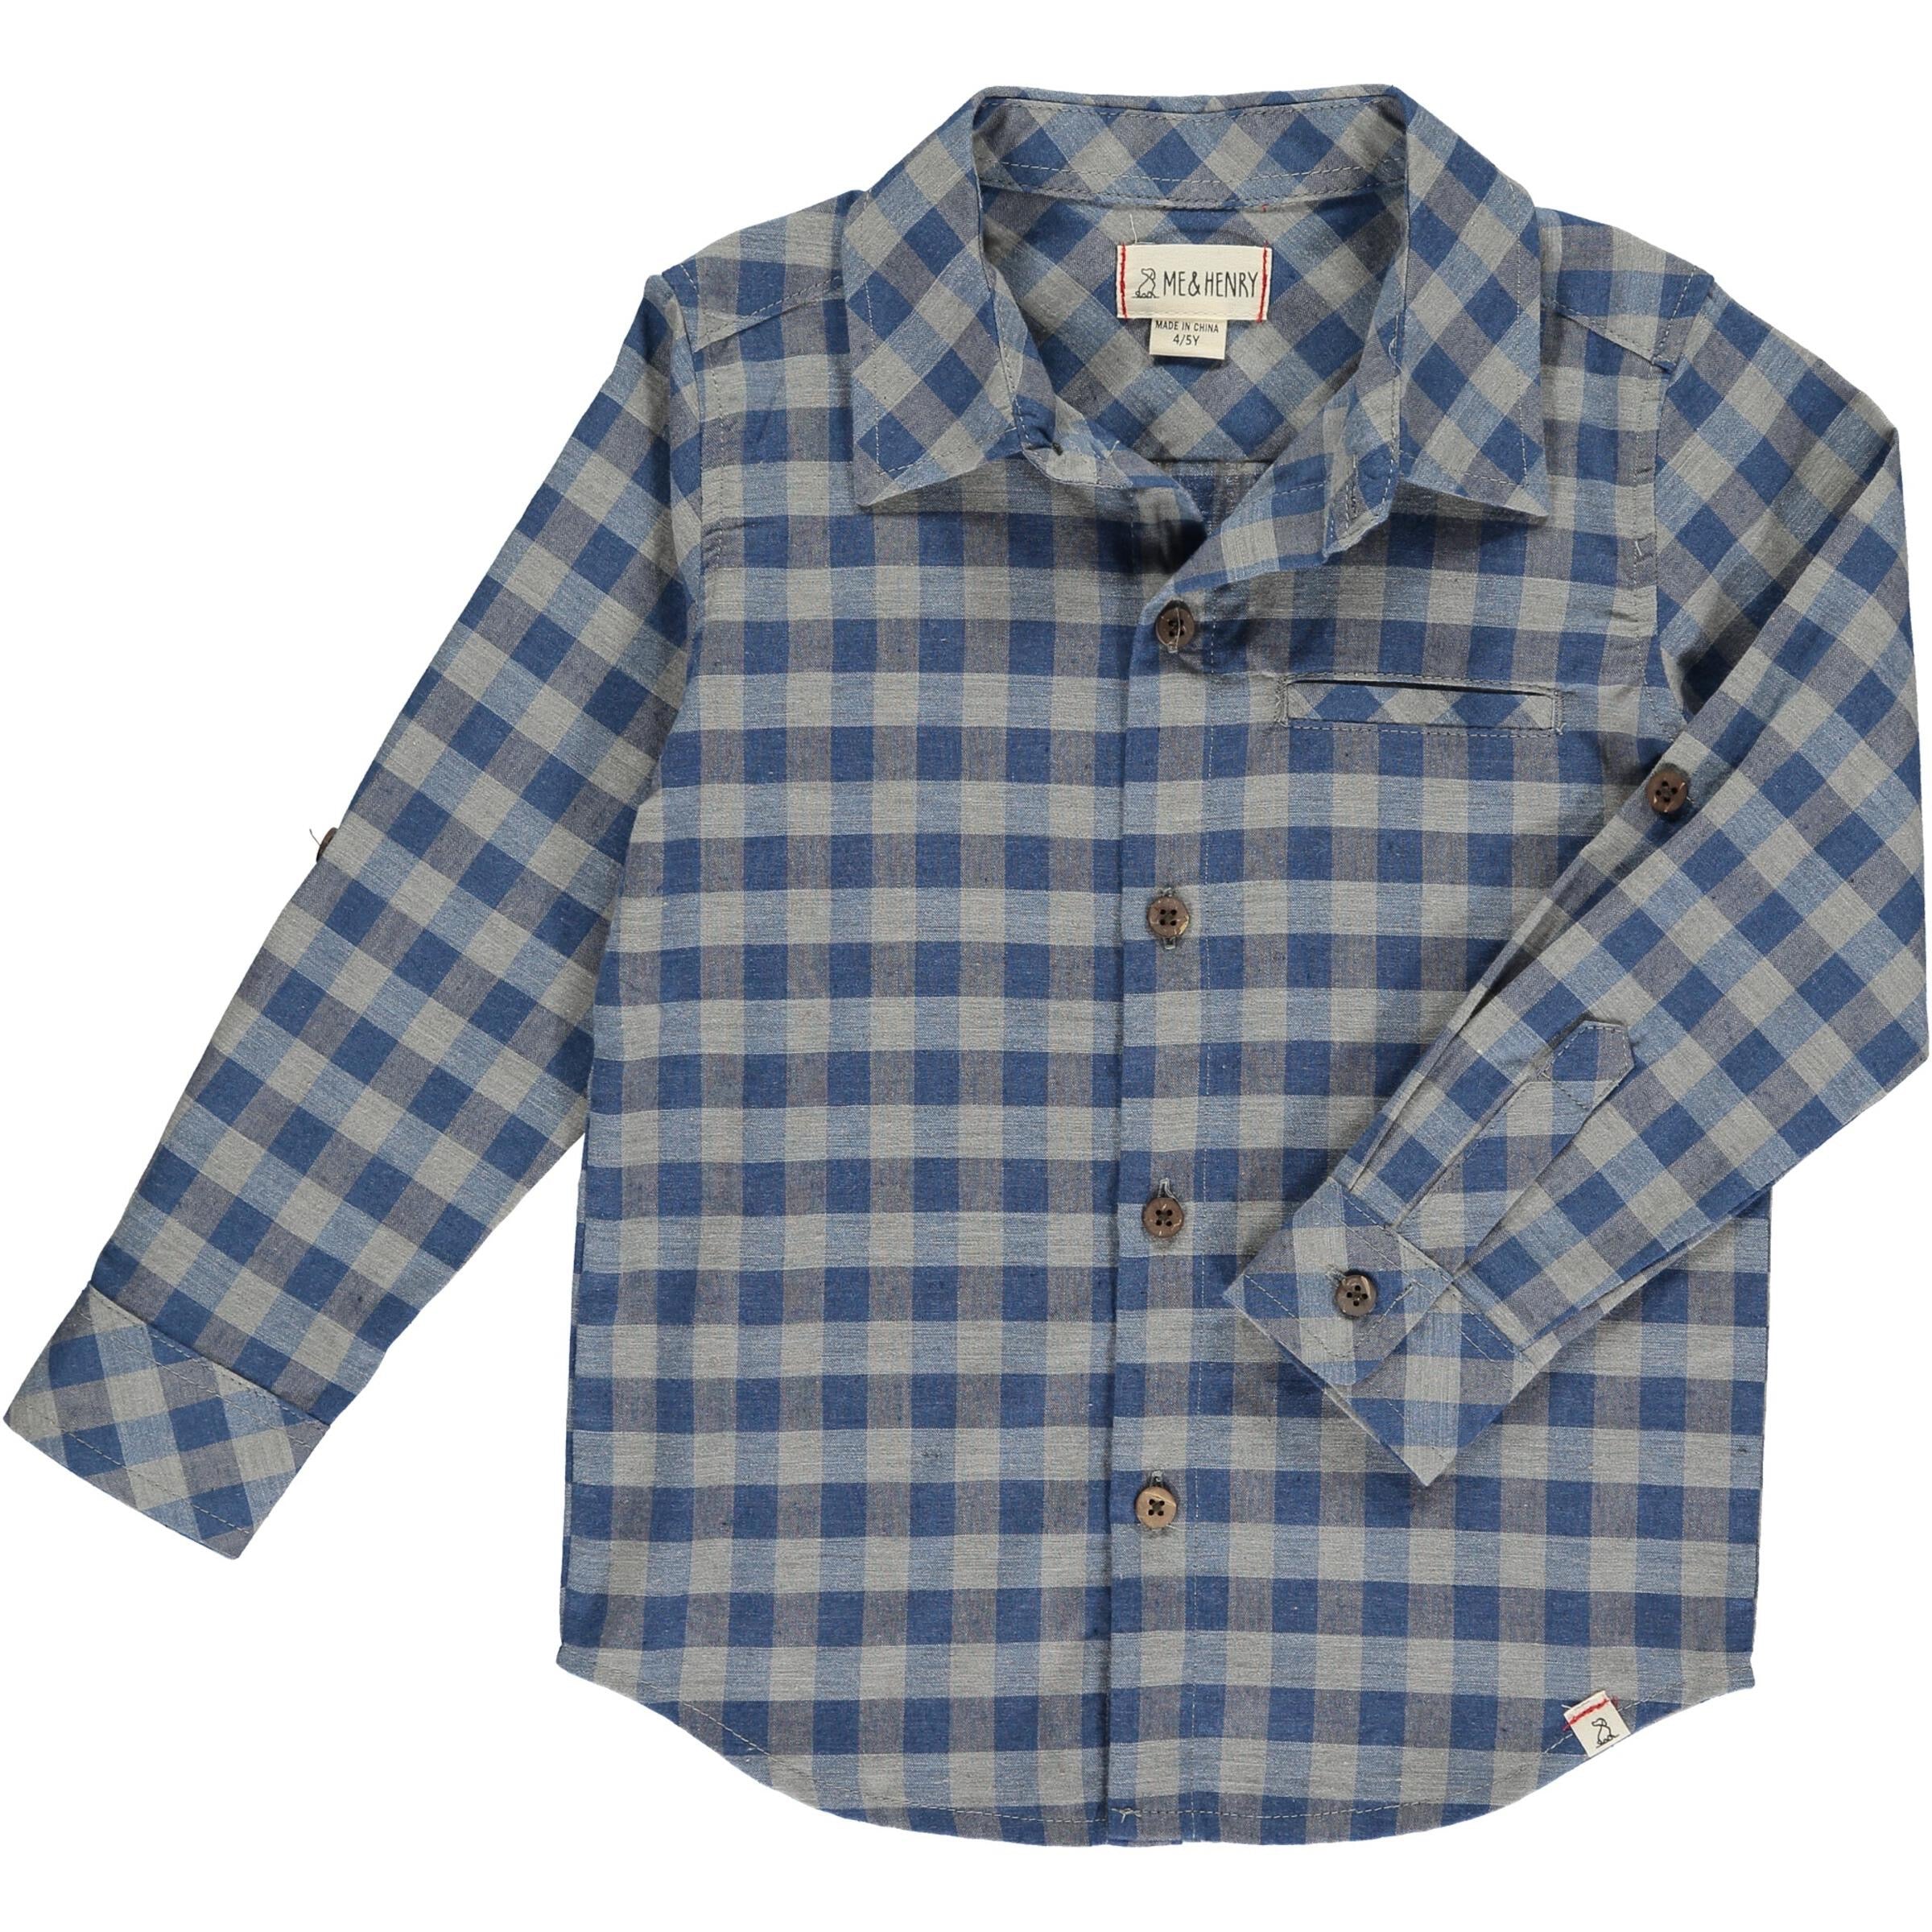 Me & Henry Grey/Blue Plaid Atwood Woven Shirt-ME & HENRY-Little Giant Kidz